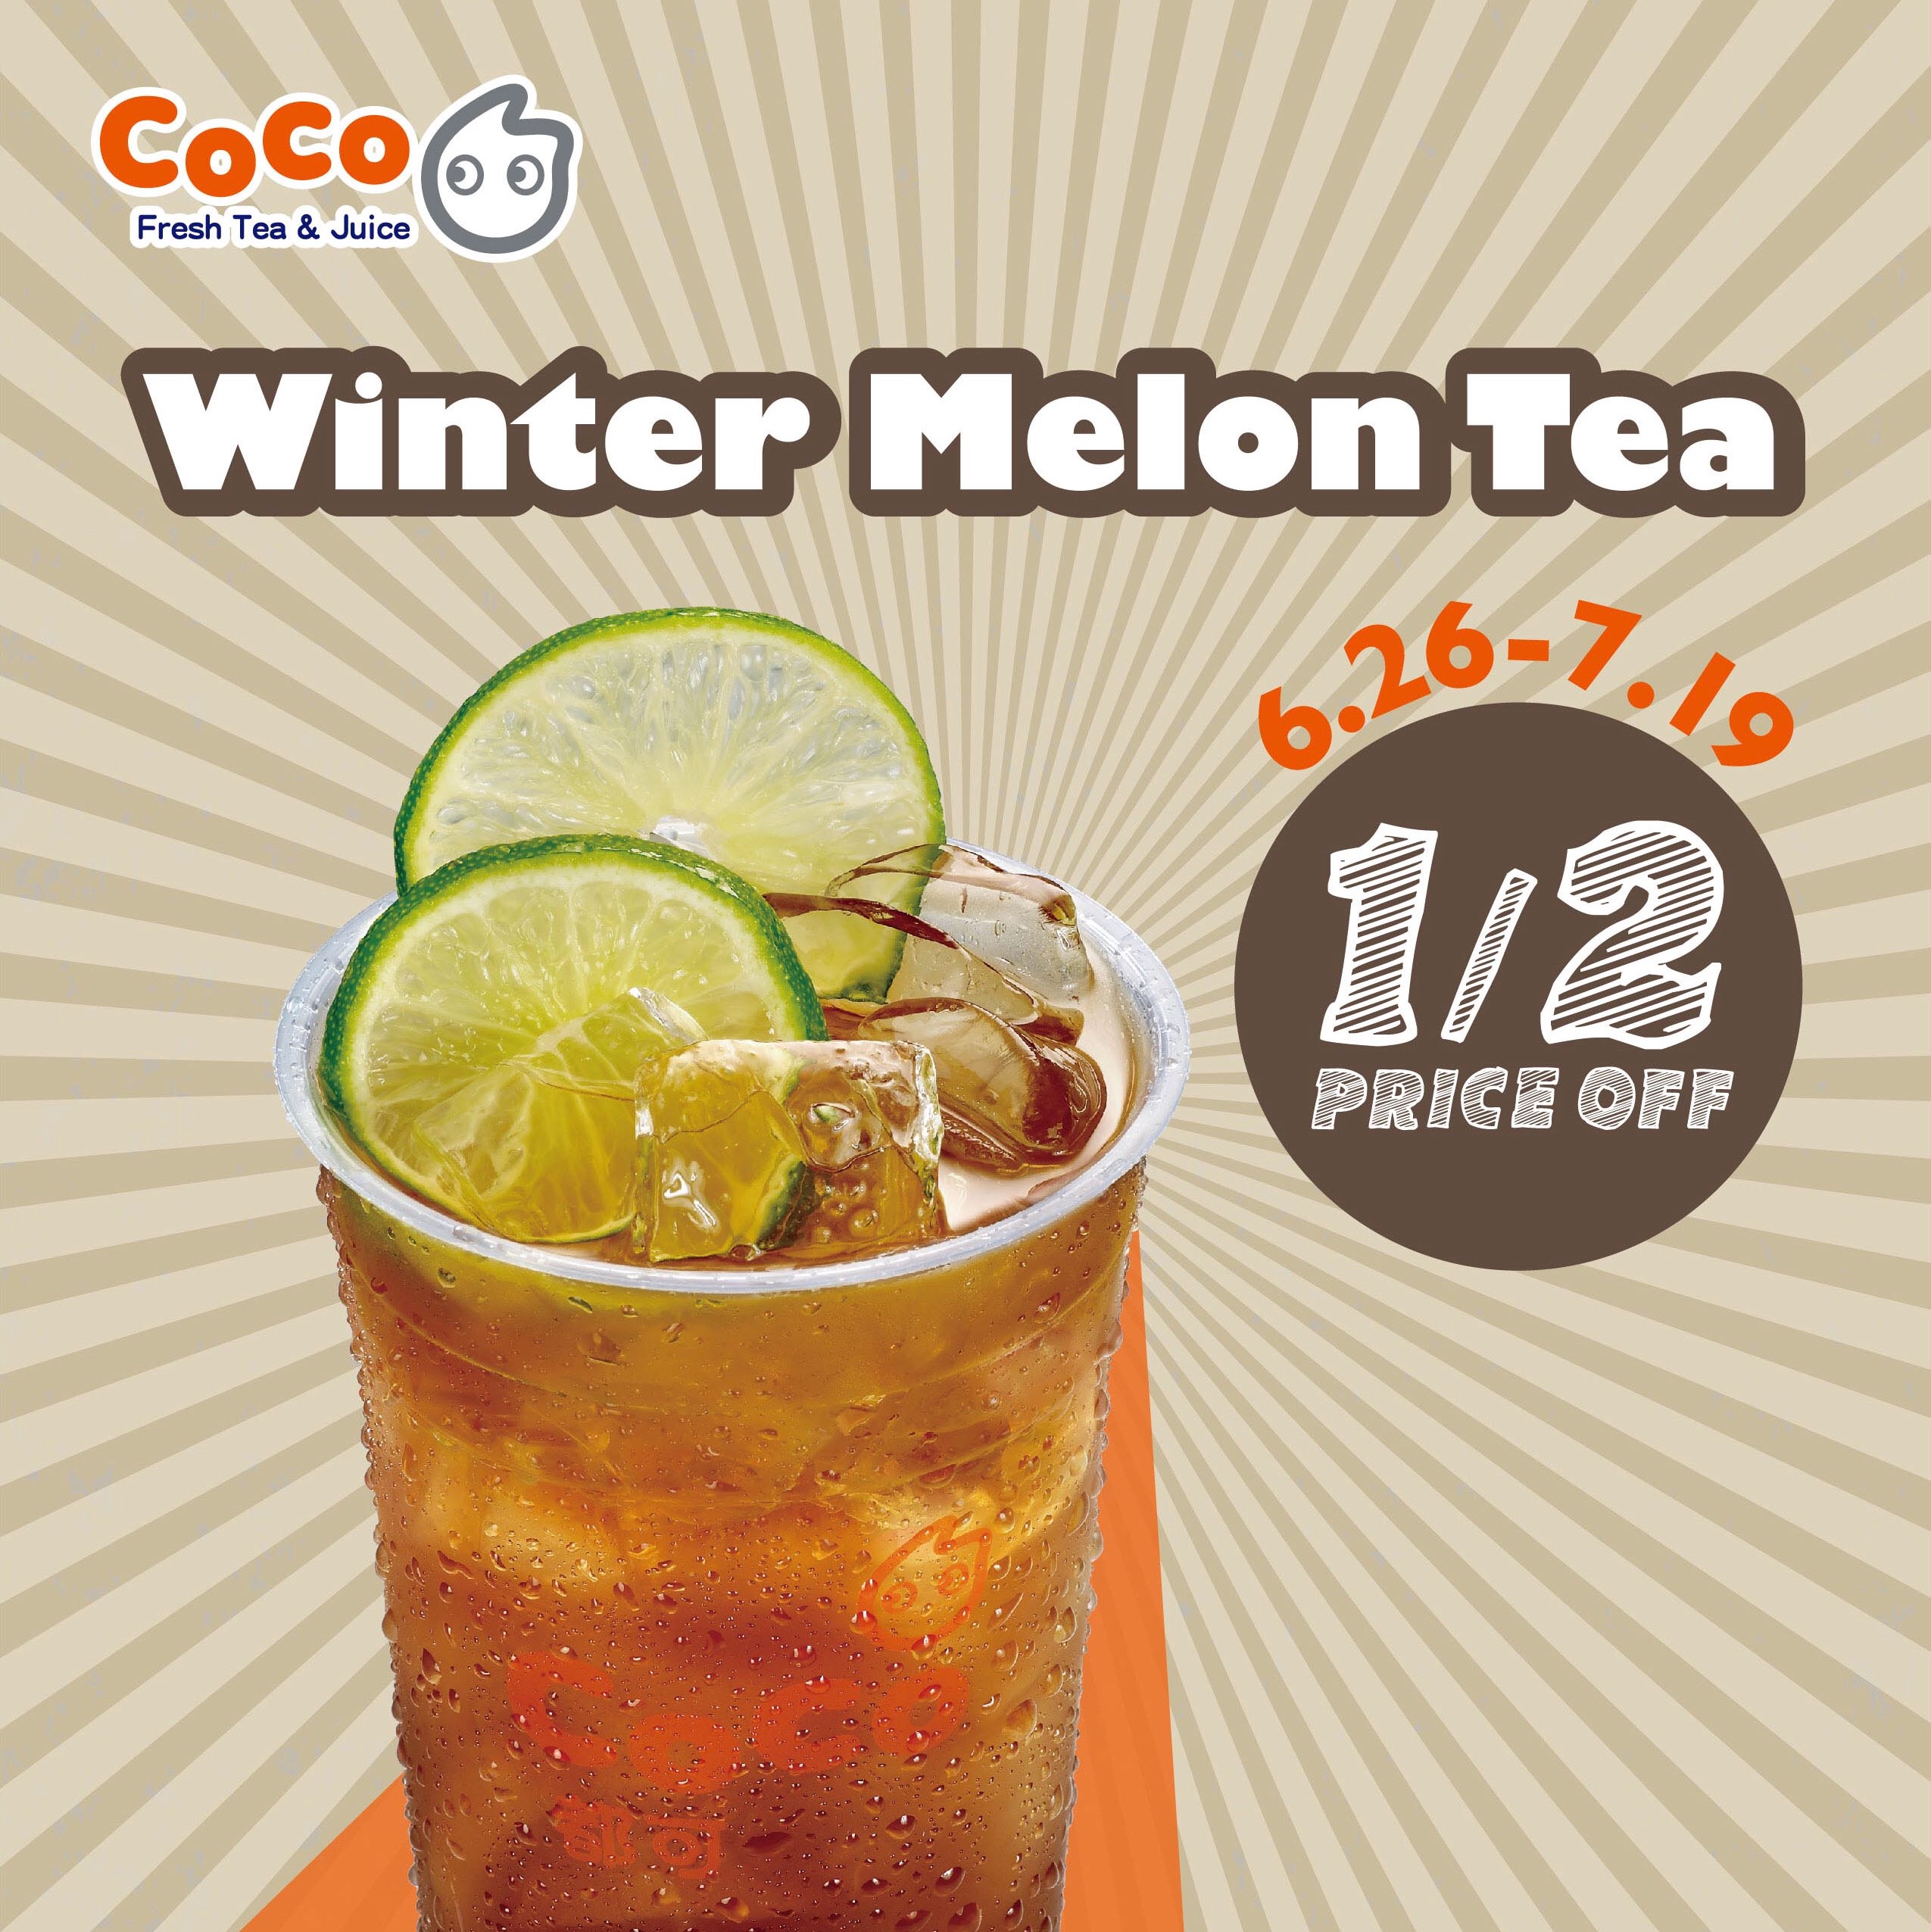 Newly renovated! Coco asks you to drink tea at half price!